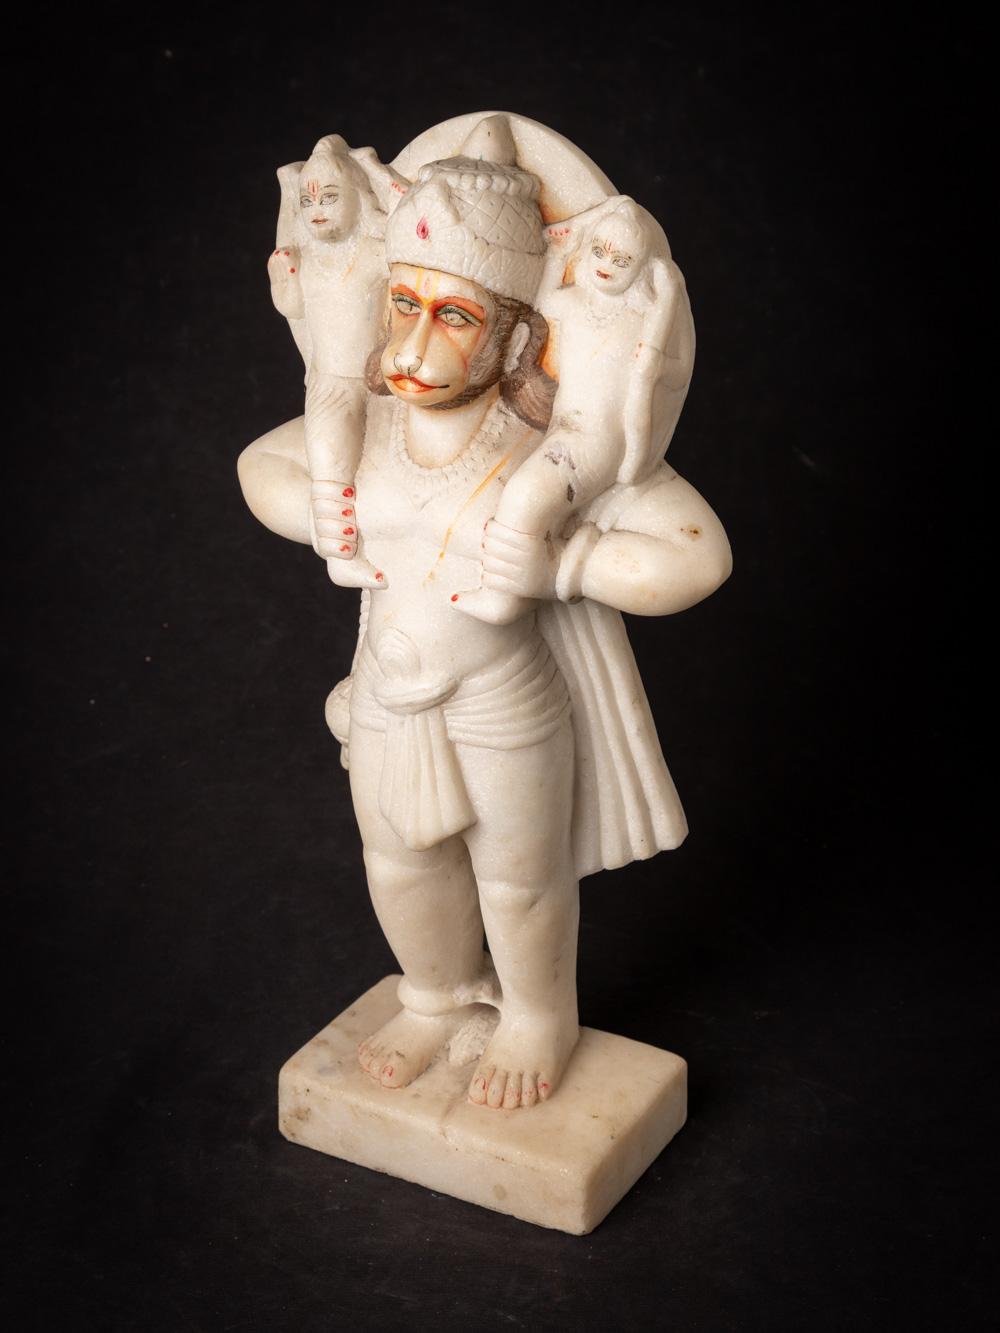 Middle 20th century old marble Hanuman statue from India - Original Buddhas For Sale 7